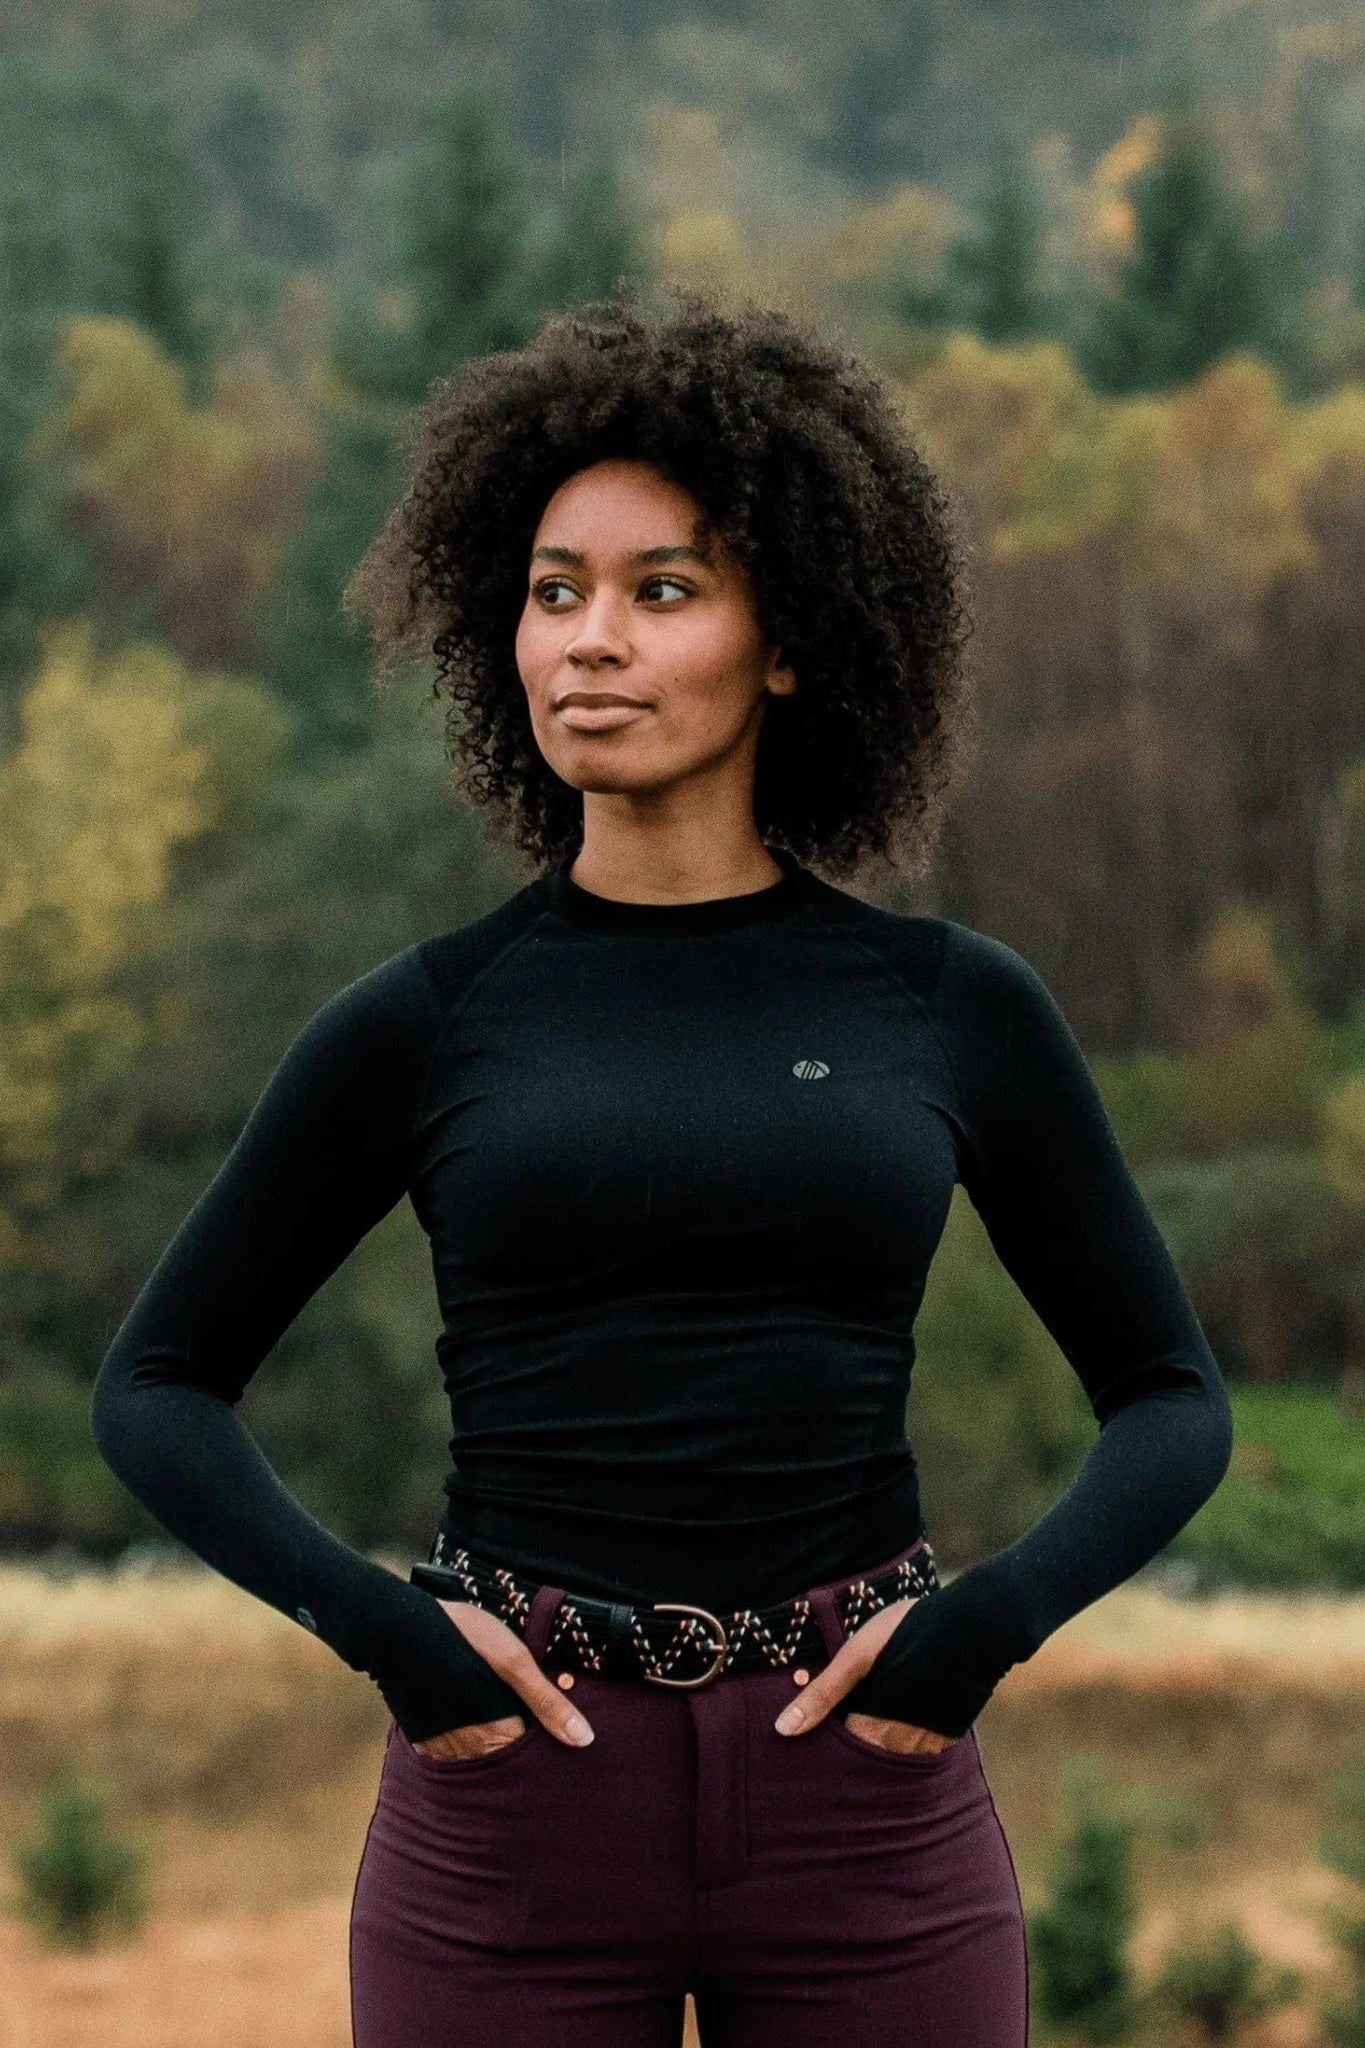 Women's Thermal Tops, Thermal Base Layer Tops